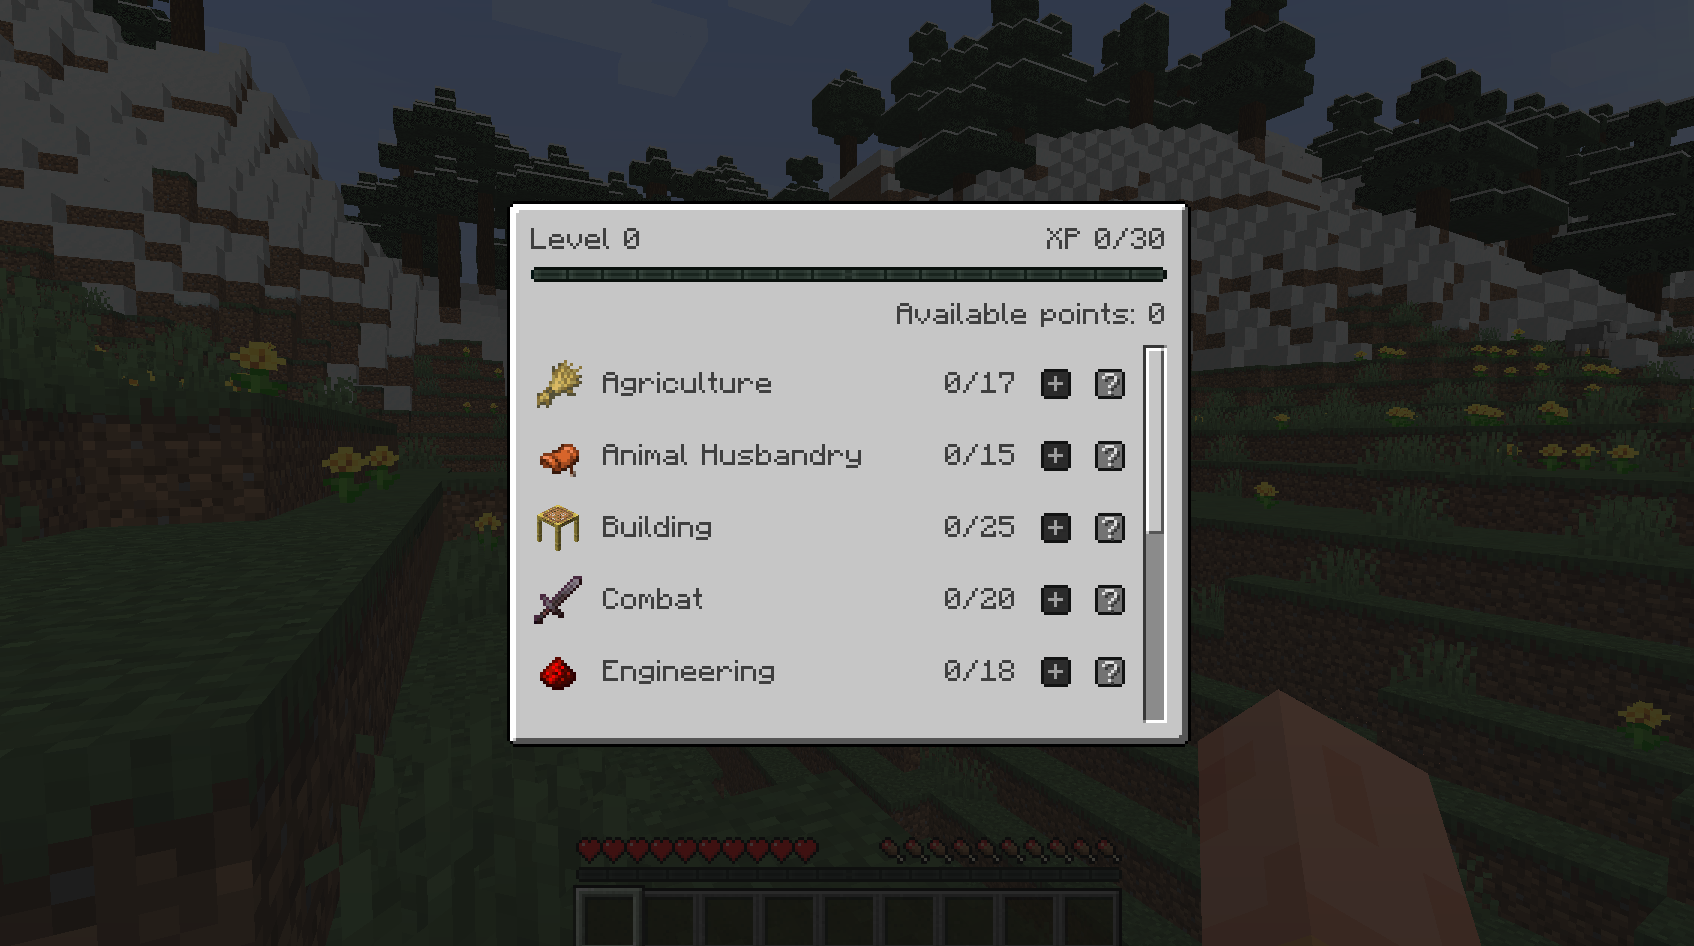 When the skills list screen is opened with 'K' (default), you can see the list of skills. Each skill shows the current level and has buttons to gain a level in that skill and to view more information about the skill.